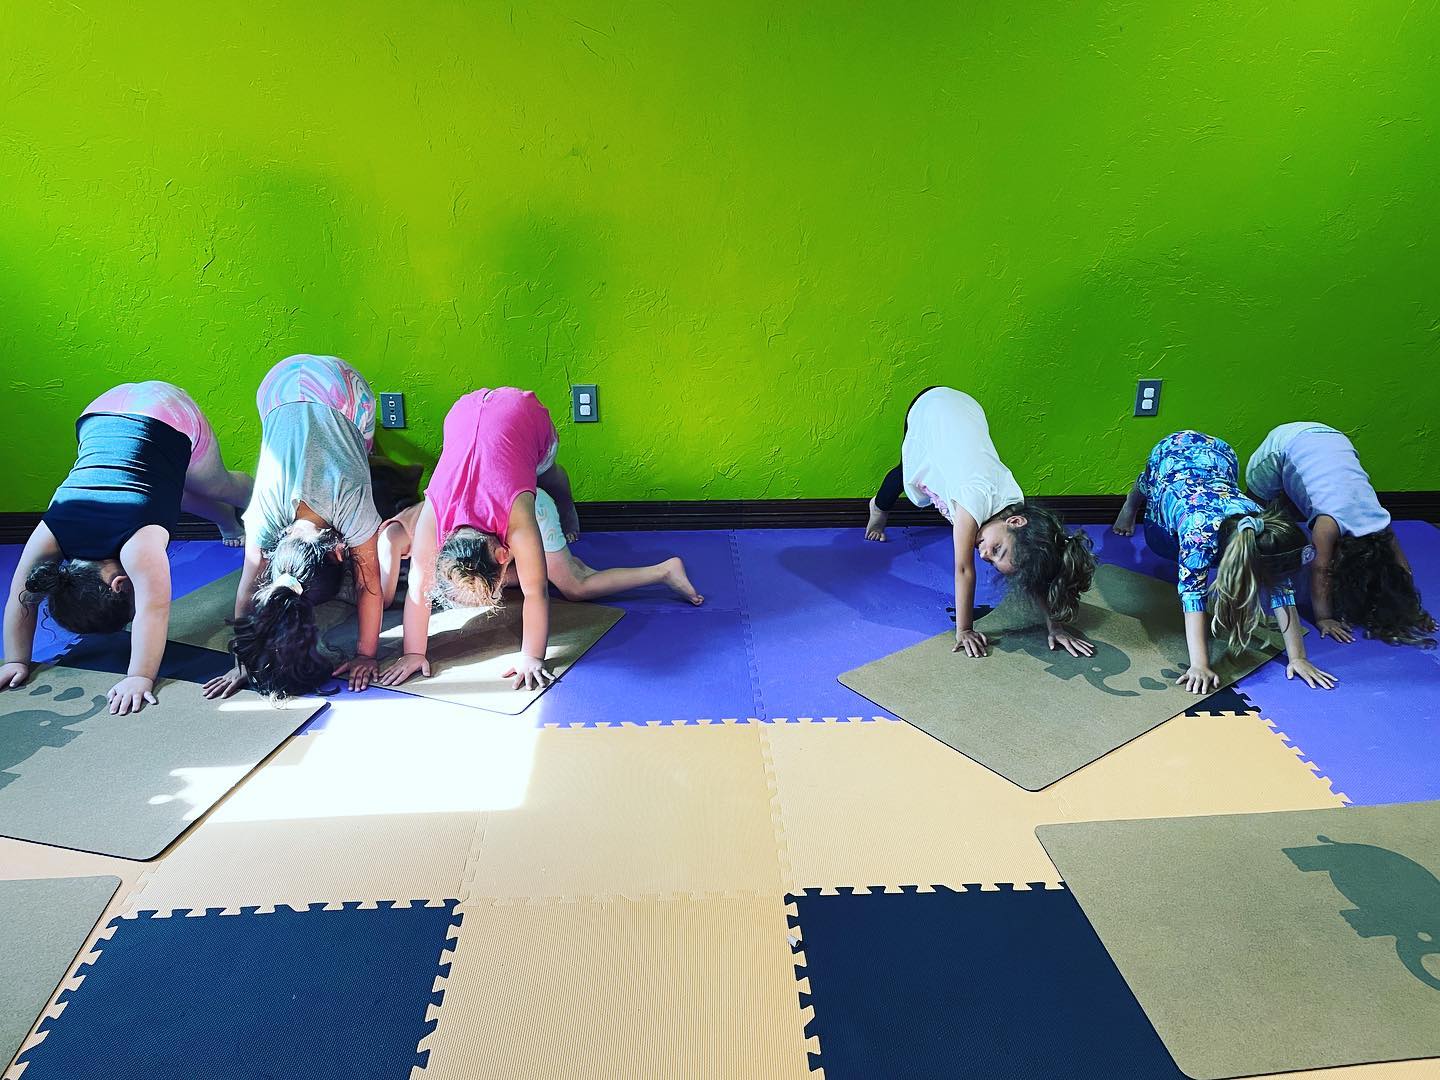 Sometimes we just have to go explore that cave! Working on our arm strength, relieving tension from our necks and backs, improving blood flow to our brains AND having a blast!

#downwarddog #yogagames #yogaforkids #play #maketimeforplay #strongkids #mansfieldtx #arlingtontx #gptx #dfwmoms #yogicubs